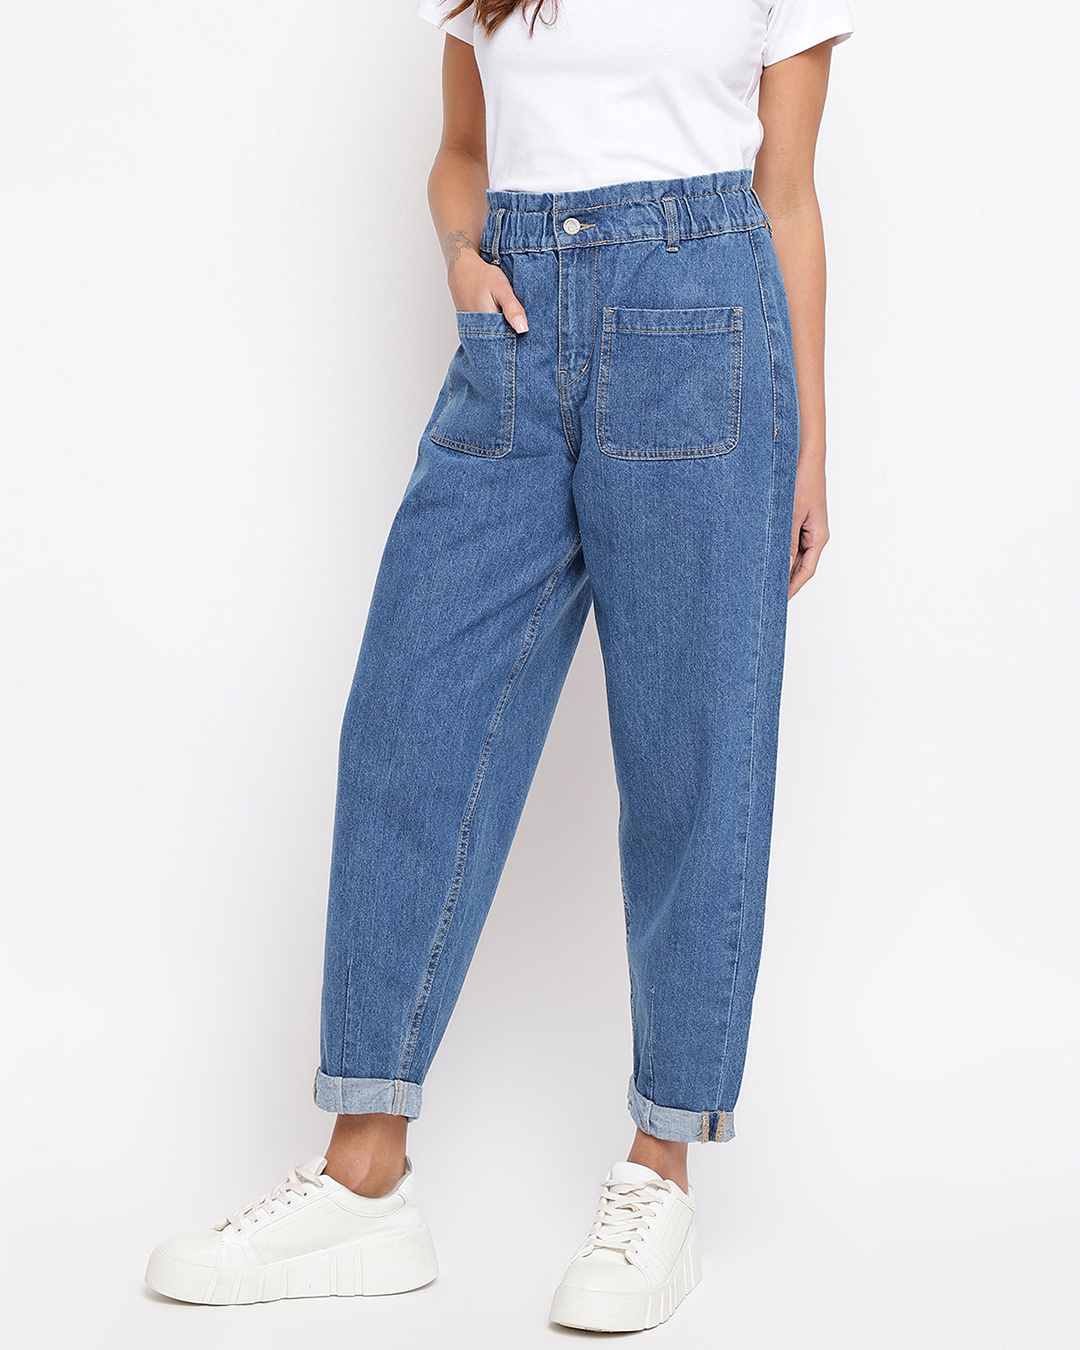 Shop Women's Blue Relaxed Fit Jeans-Back